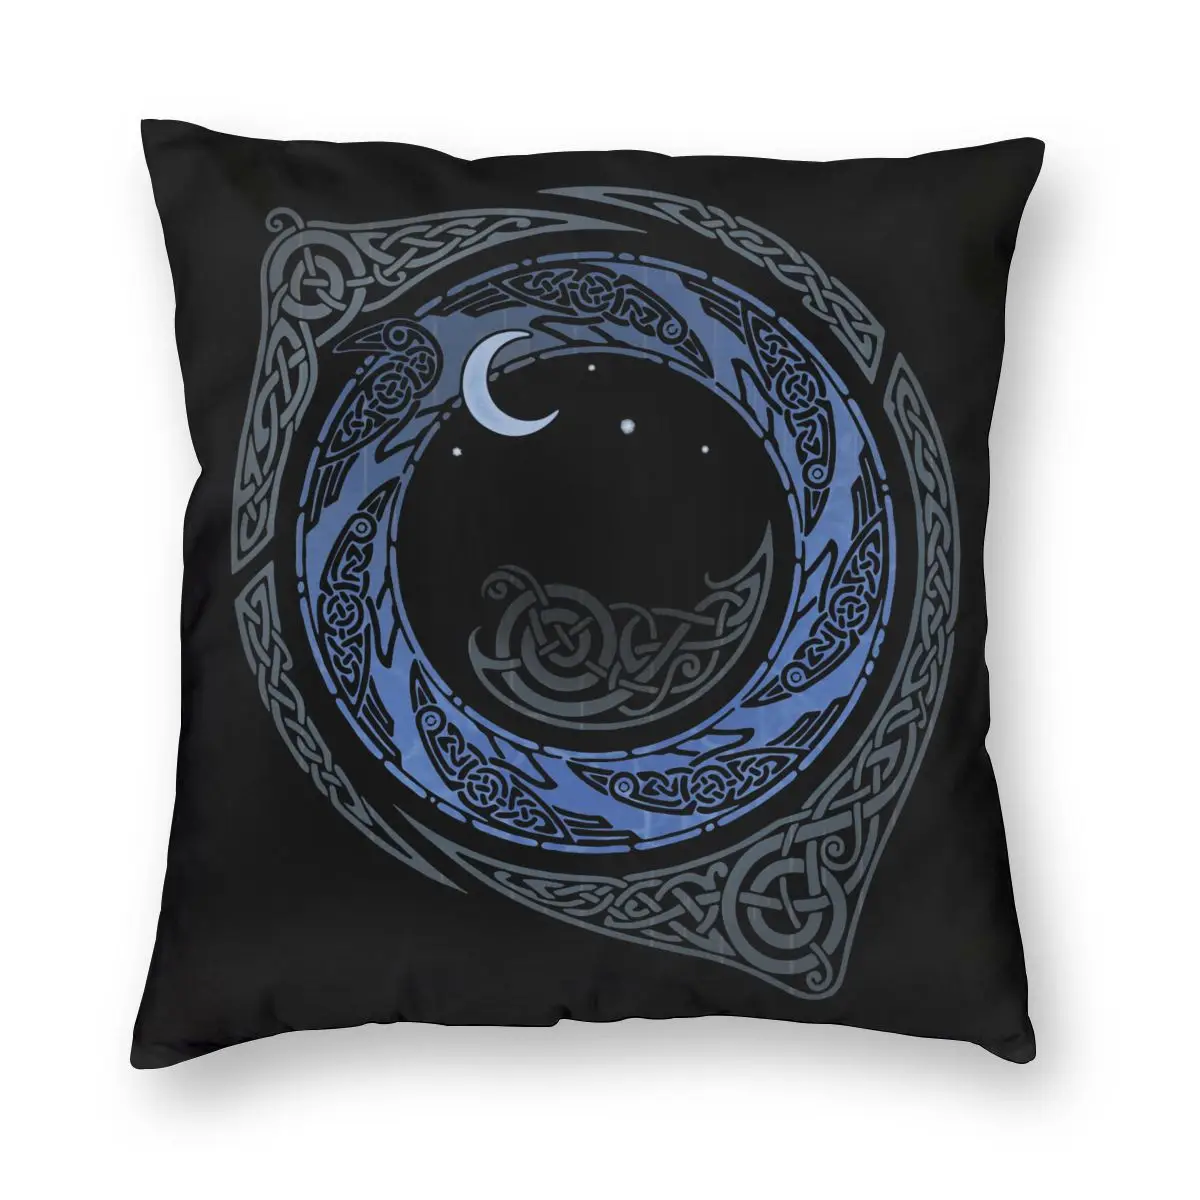 

Moonlight Roundelay Vikings Valhalla Odin Pillowcover Decoration Cushion Cover Throw Pillow for Sofa Double-sided Printing